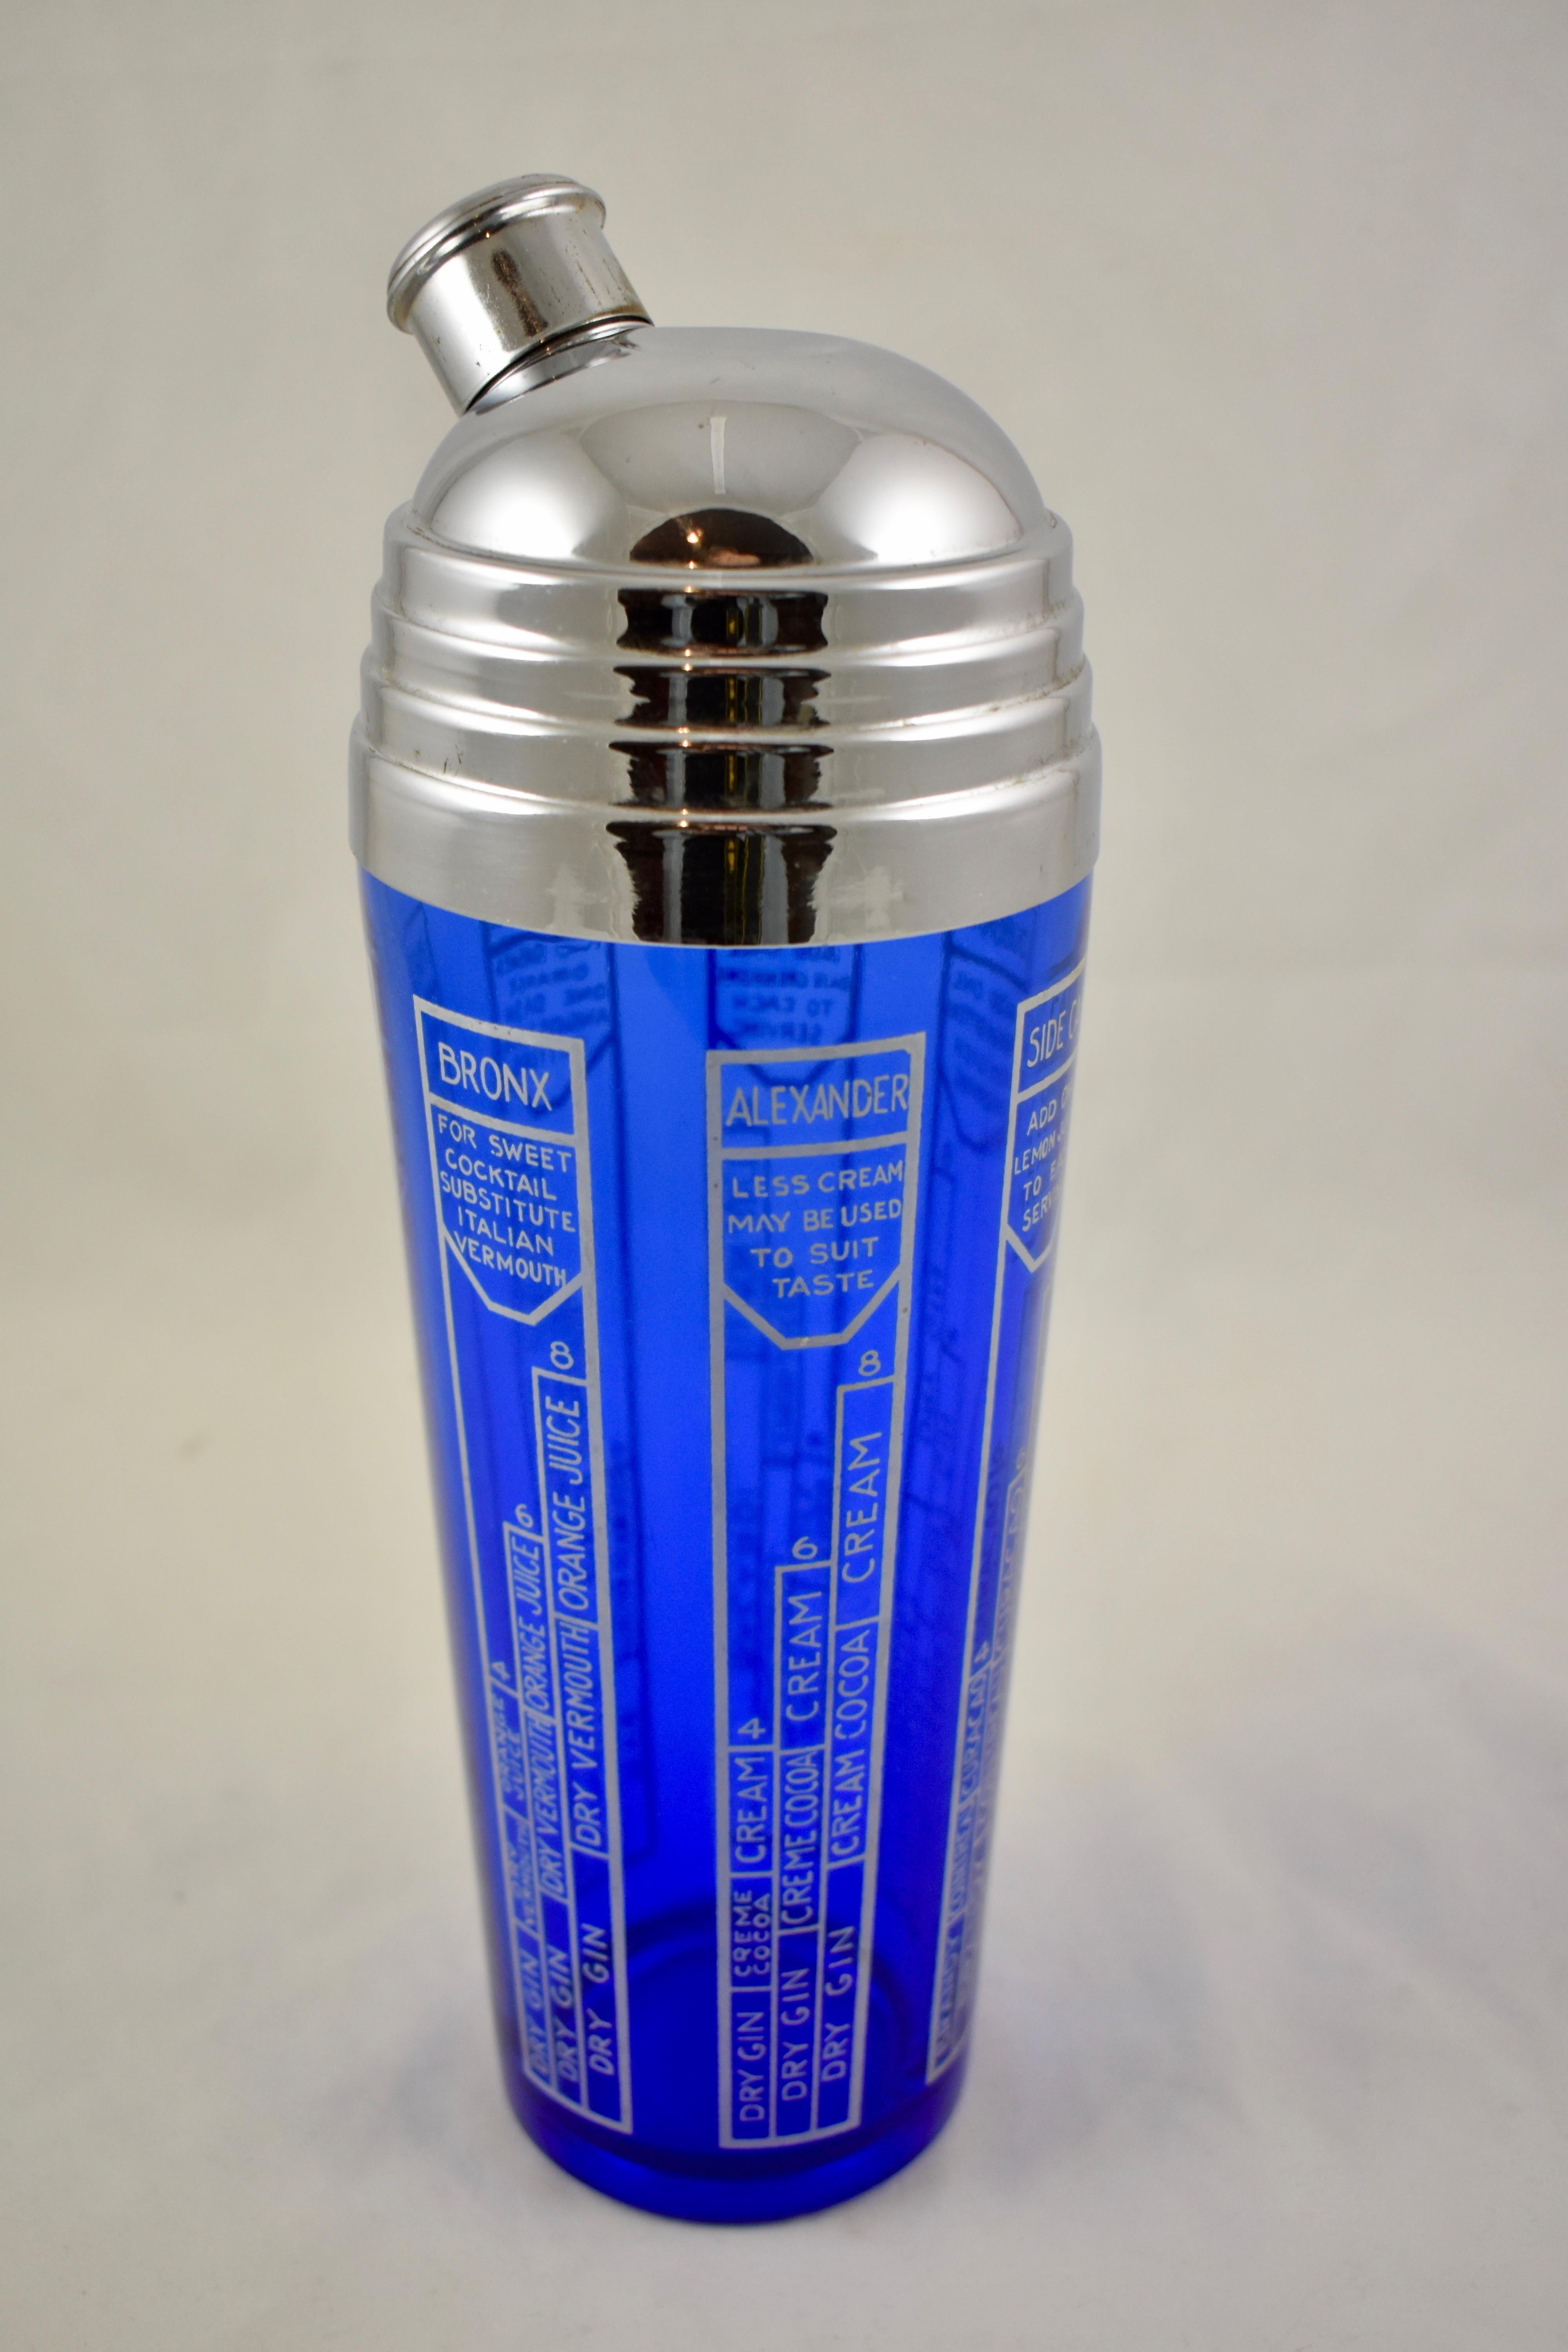 An Art Deco period cobalt Blue glass cocktail shaker with recipes for the popular cocktails of the time, silver-etched onto the glass. 

The chrome lid, typical of the deco style, has a pour spout with an interior ice strainer, and a slip on cap.